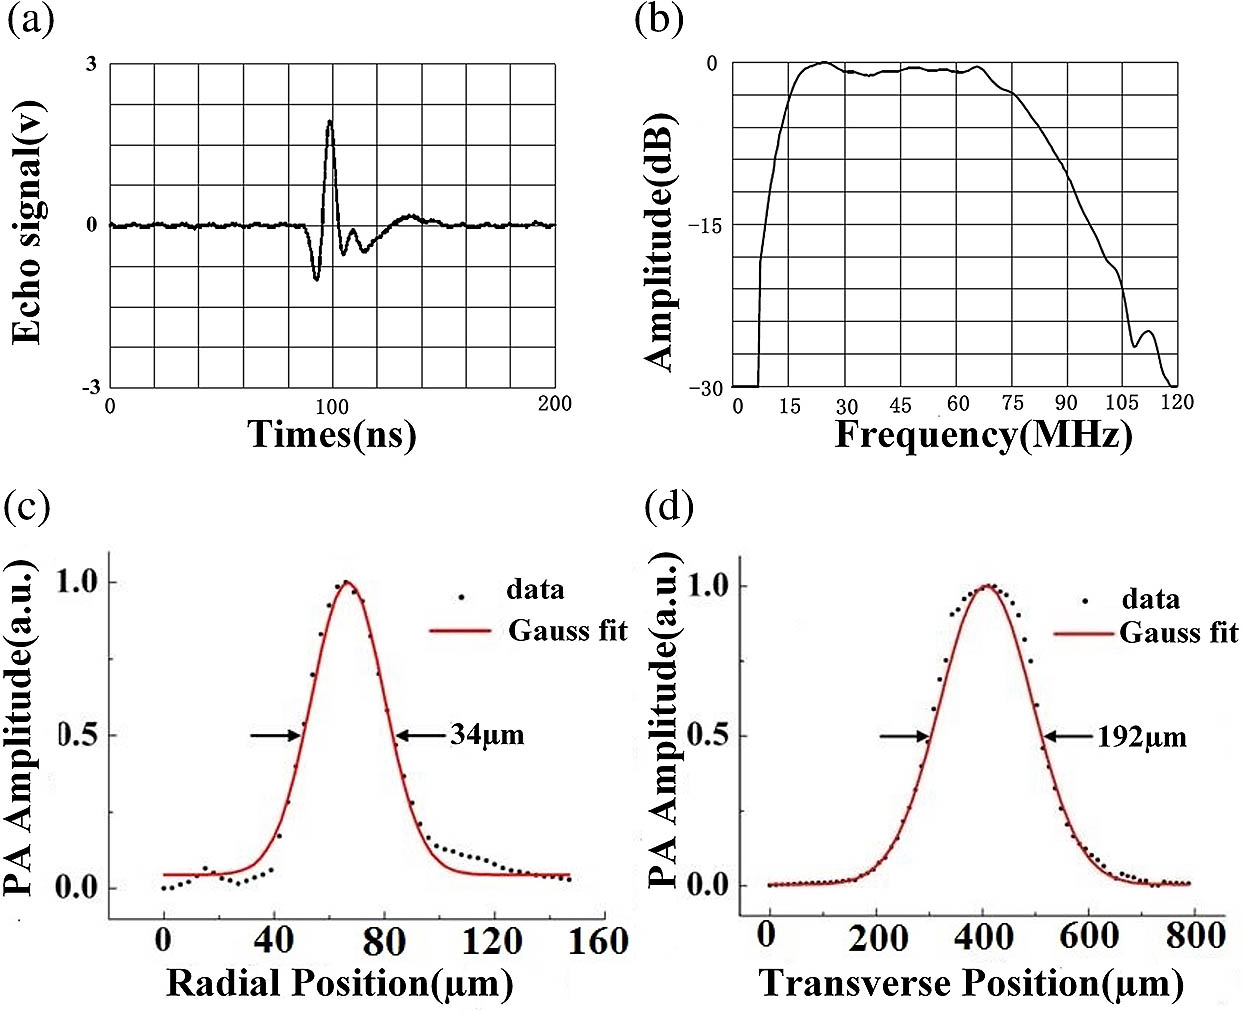 Performance of the transducer and system. (a) The echo signal detected by the transducer. (b) Bandwidth of the transducer elements with a −6 dB bandwidth of 95%. (c) The axial resolution of the system. (d) The lateral resolution of the system.